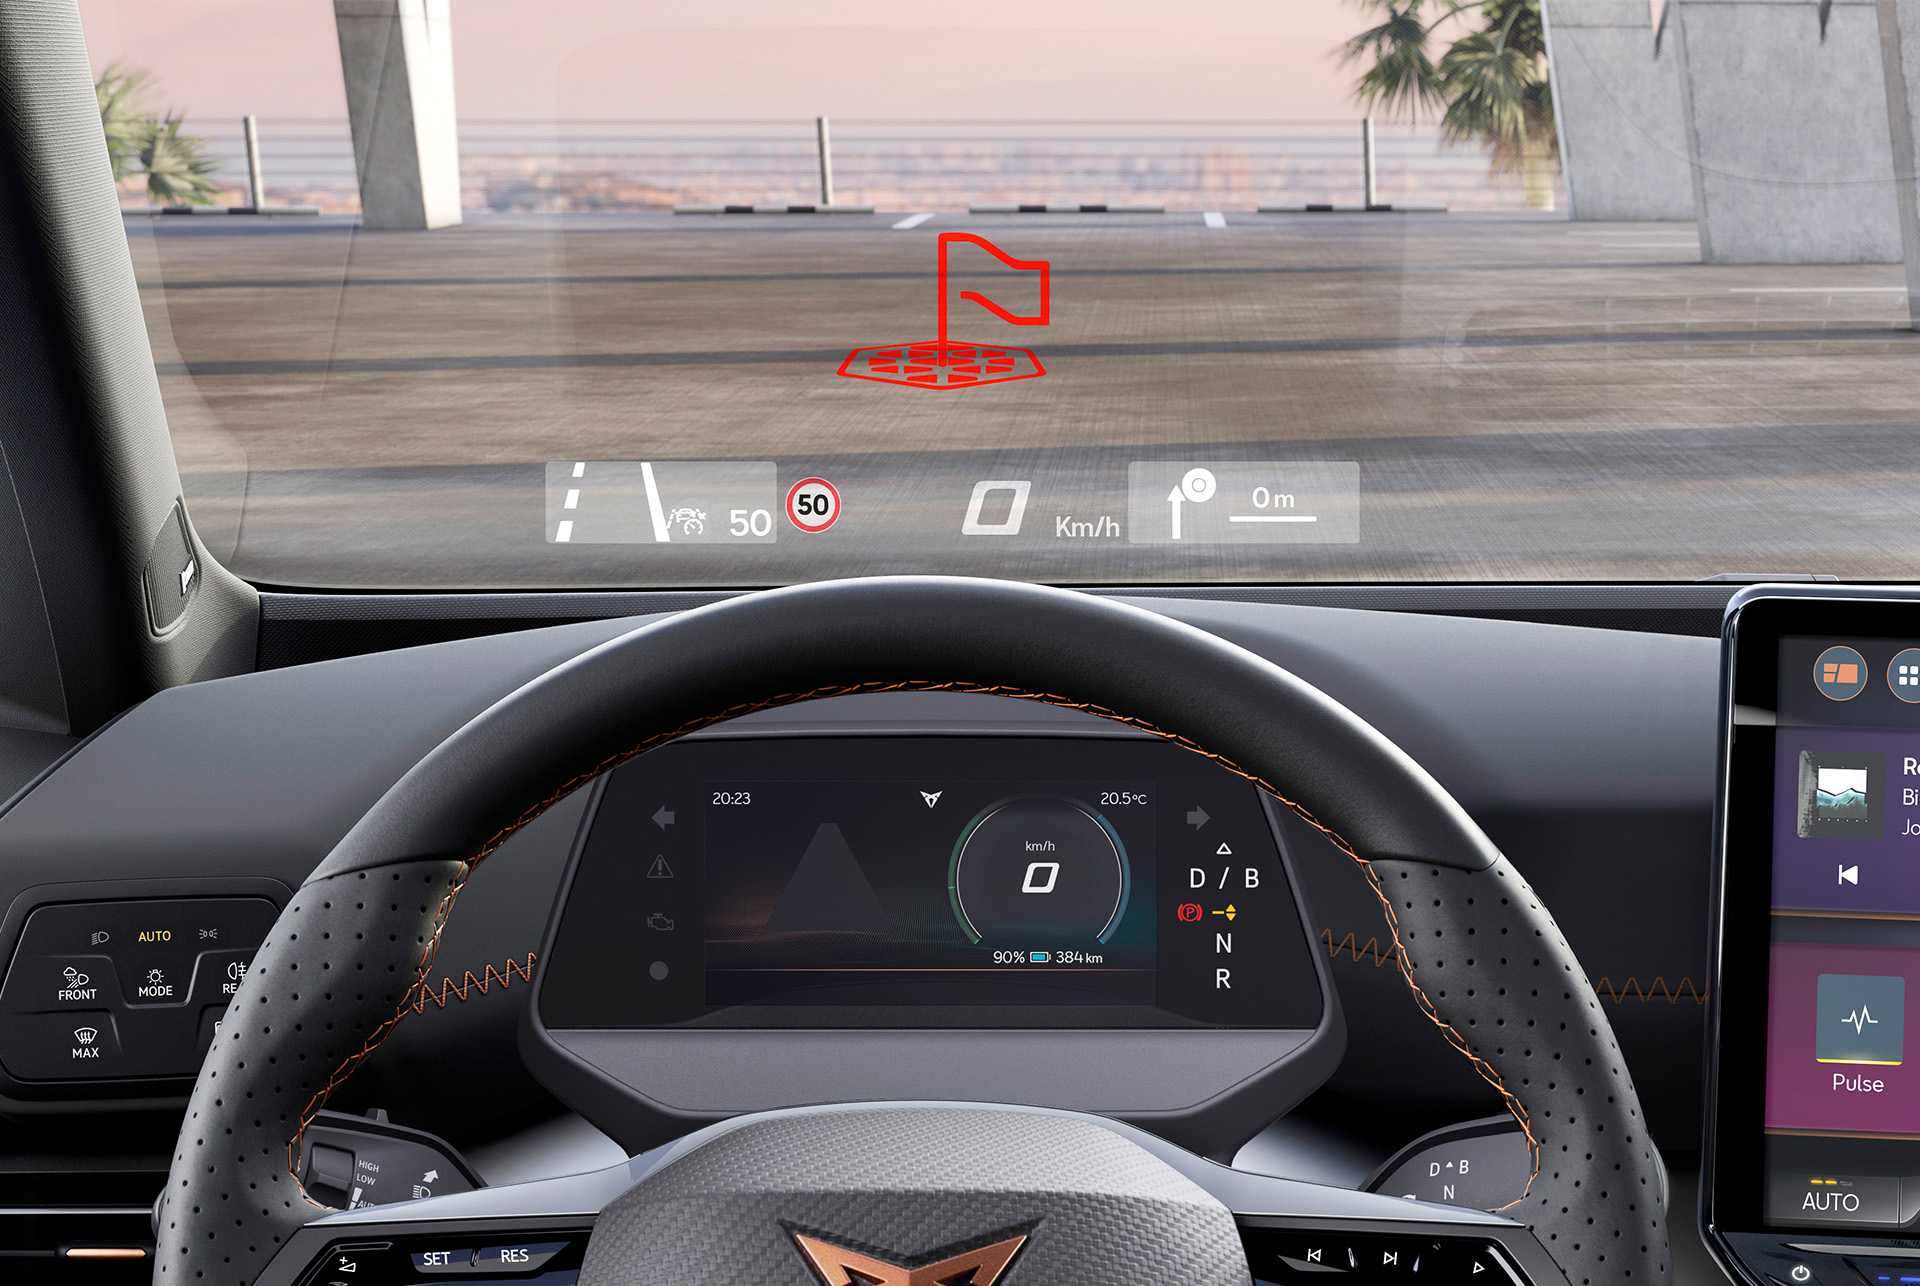 CUPRA Born augmented reality info projected on the windshield